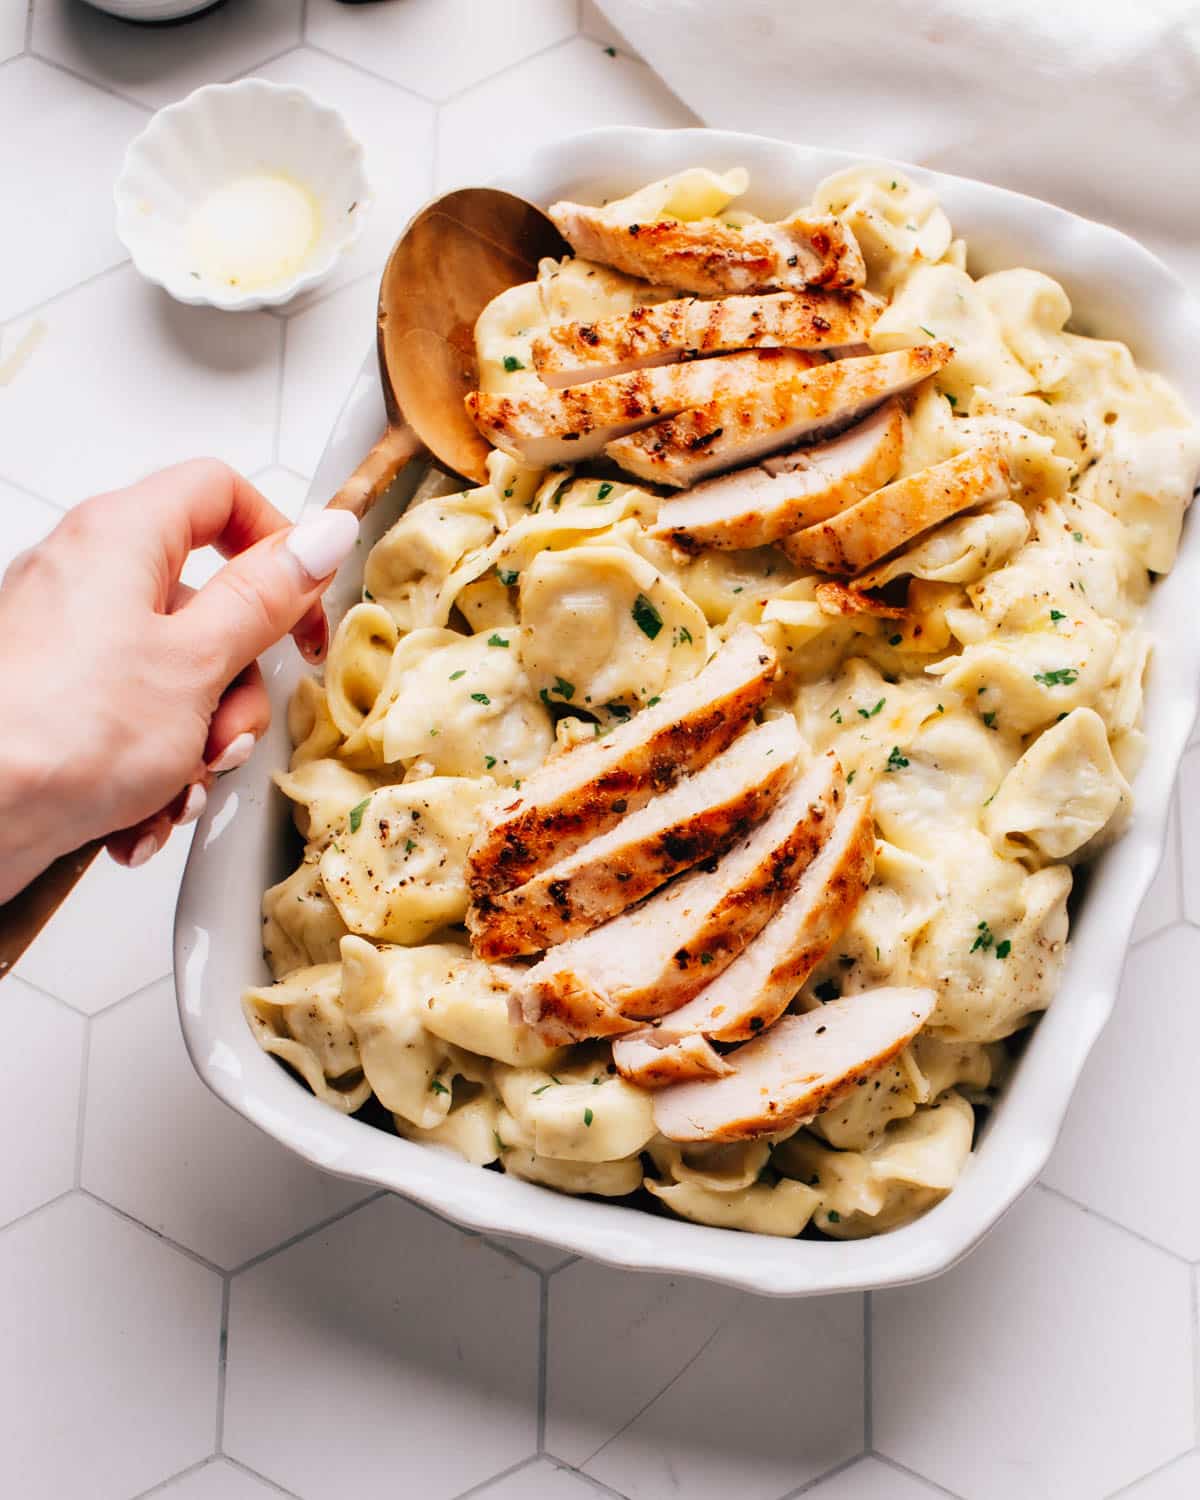 Asiago tortellini Alfredo with grilled chicken served in a white baking dish on a wooden table. The dish is garnished with minced chives and parsley